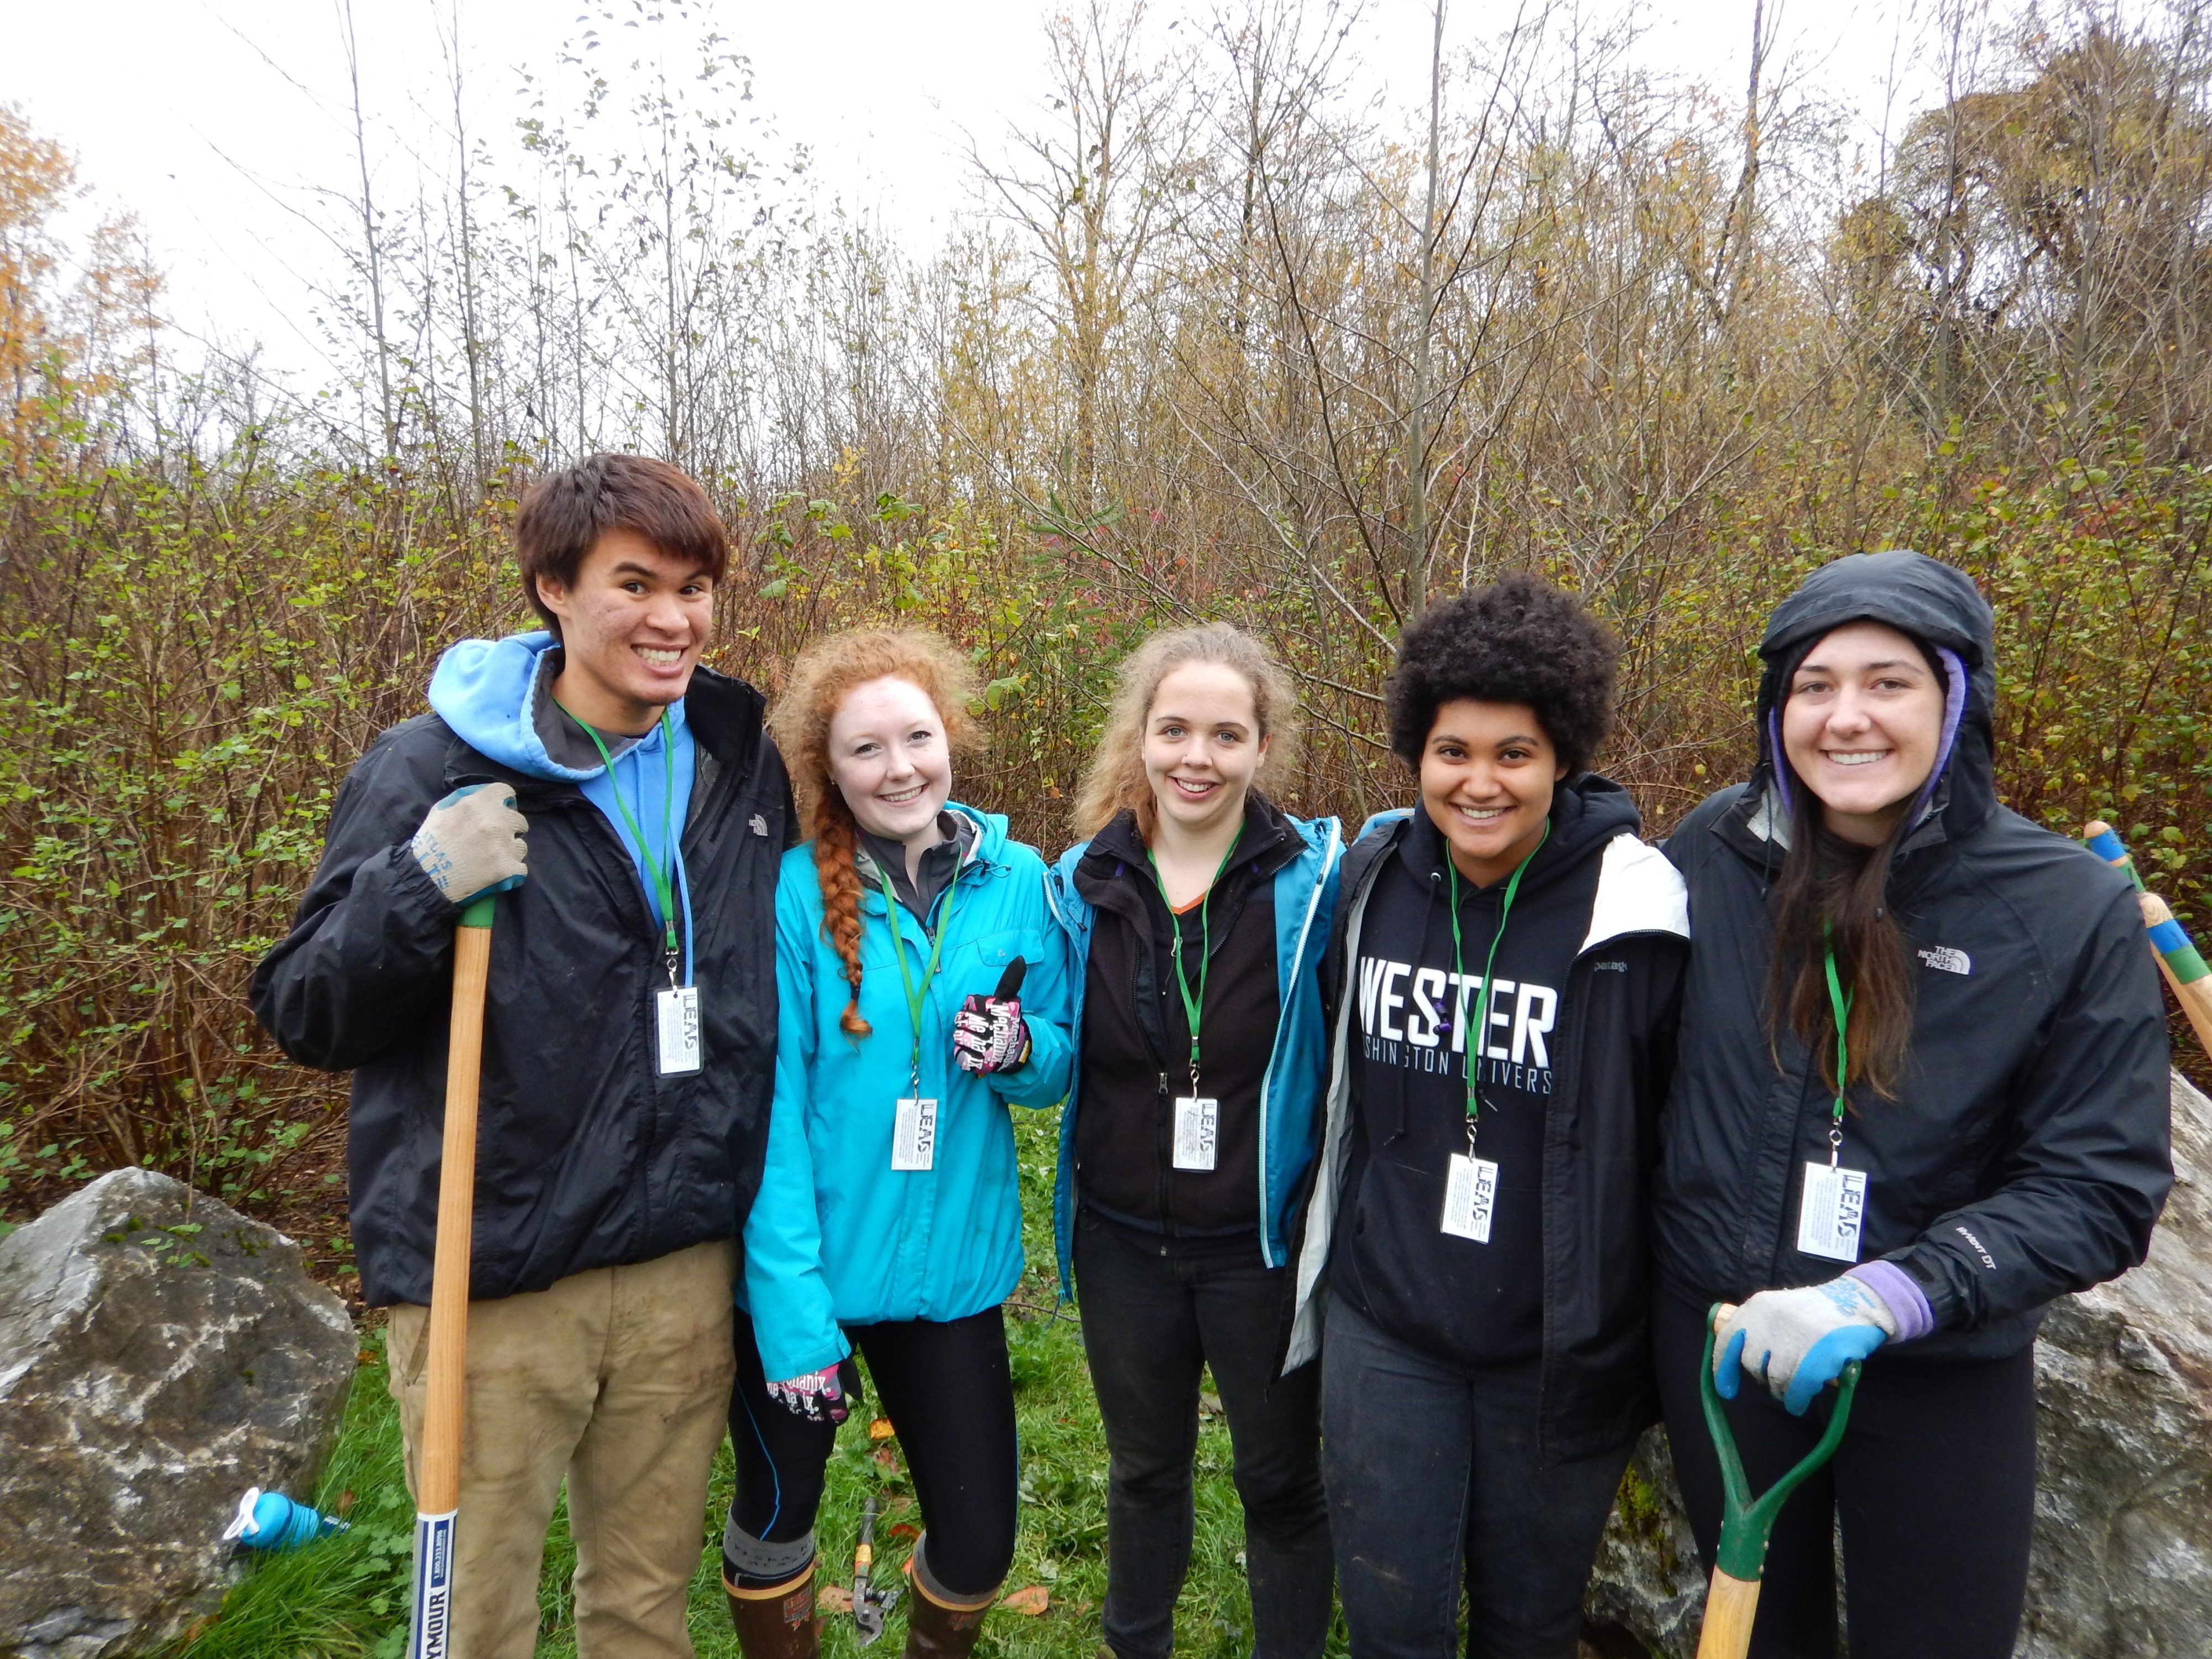 Five volunteers holding shovels and smiling together with trees in the background